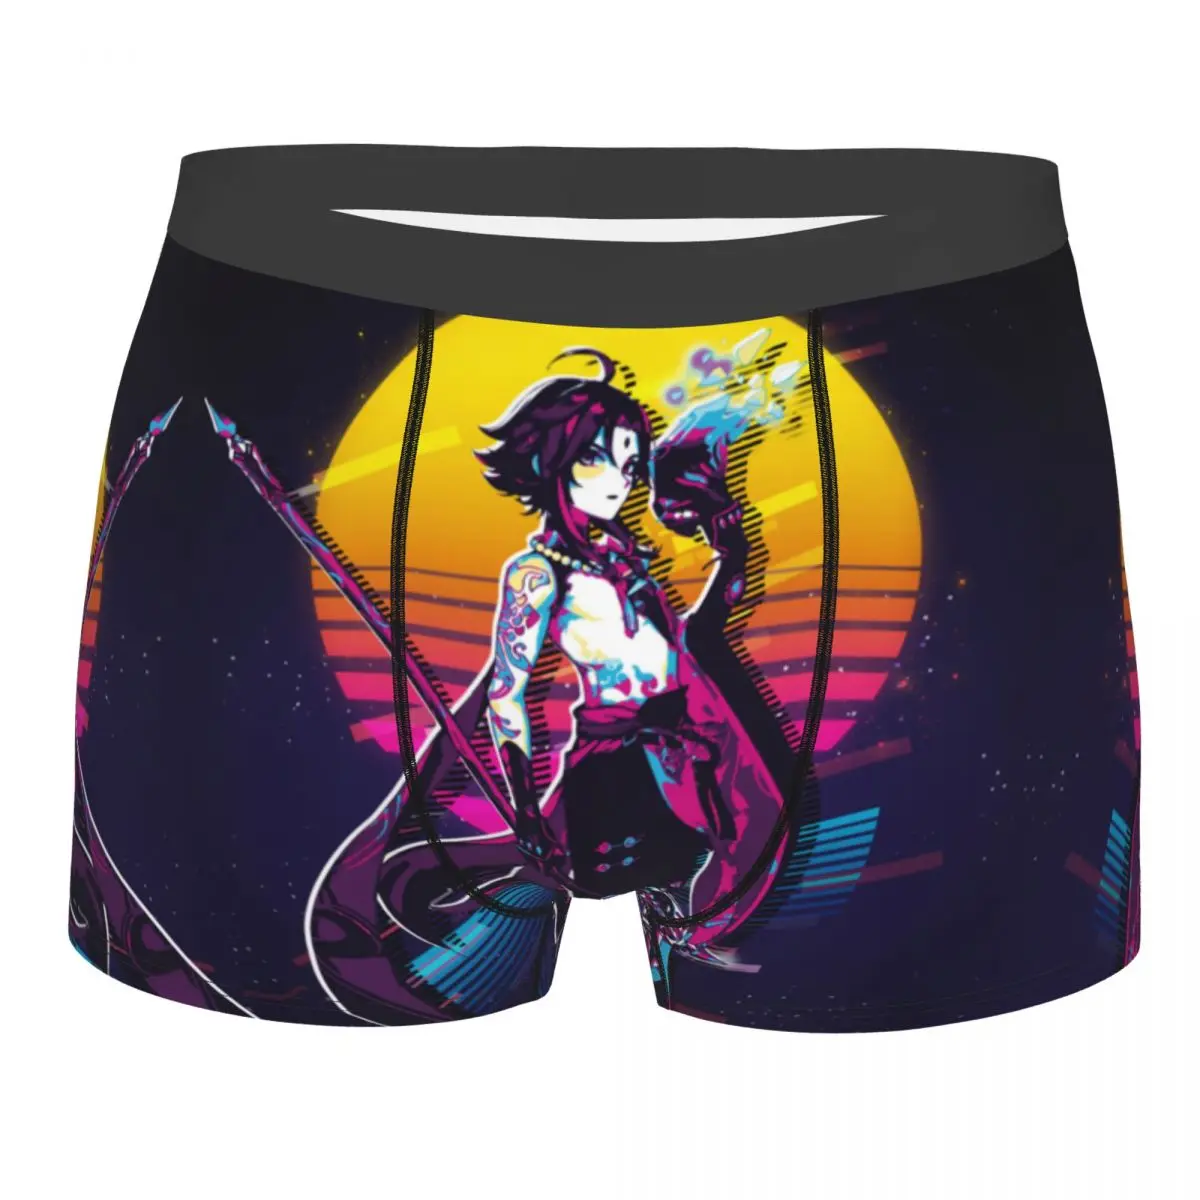 

Xiao Genshin Impact 80s Retro Lightweight Men Underwear Anime Game Boxer Briefs Shorts Panties Sexy Soft Underpants for Homme